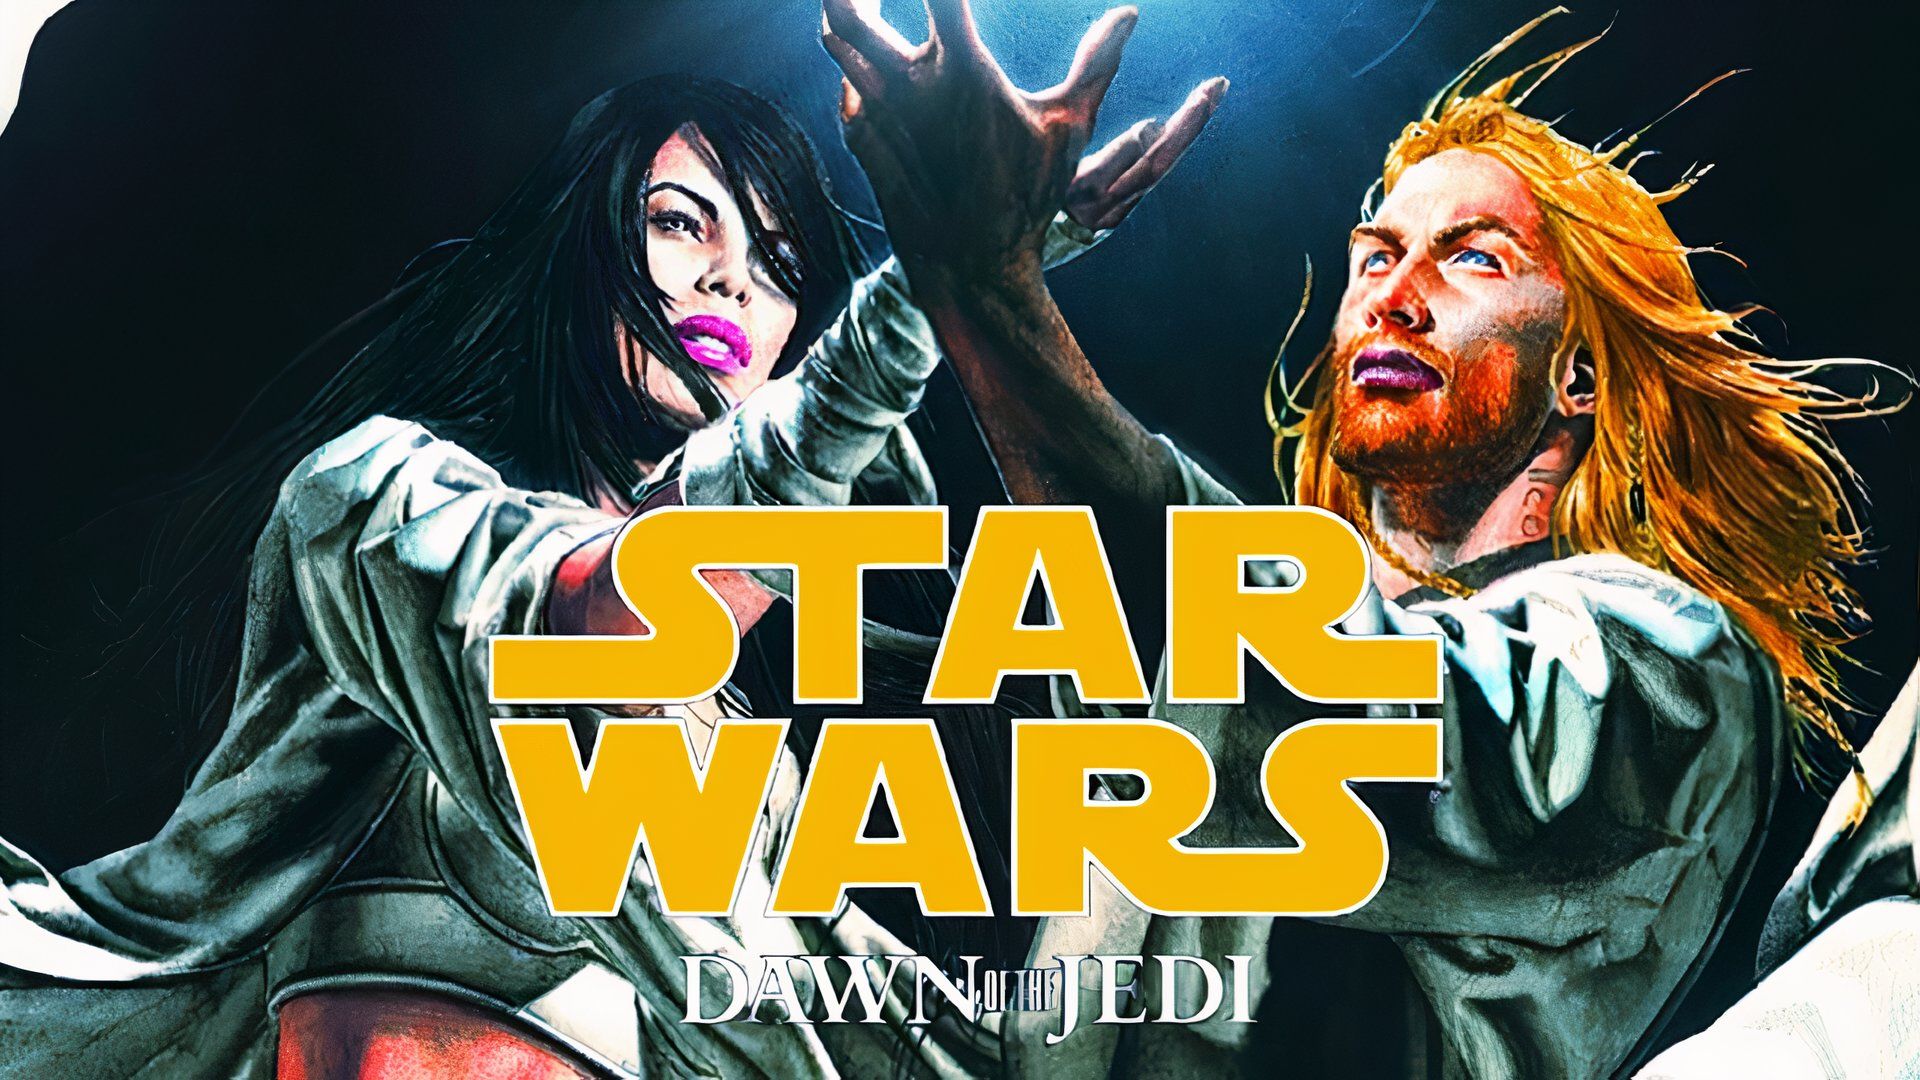 Star Wars Dawn of the Jedi Image from Marvel Comics